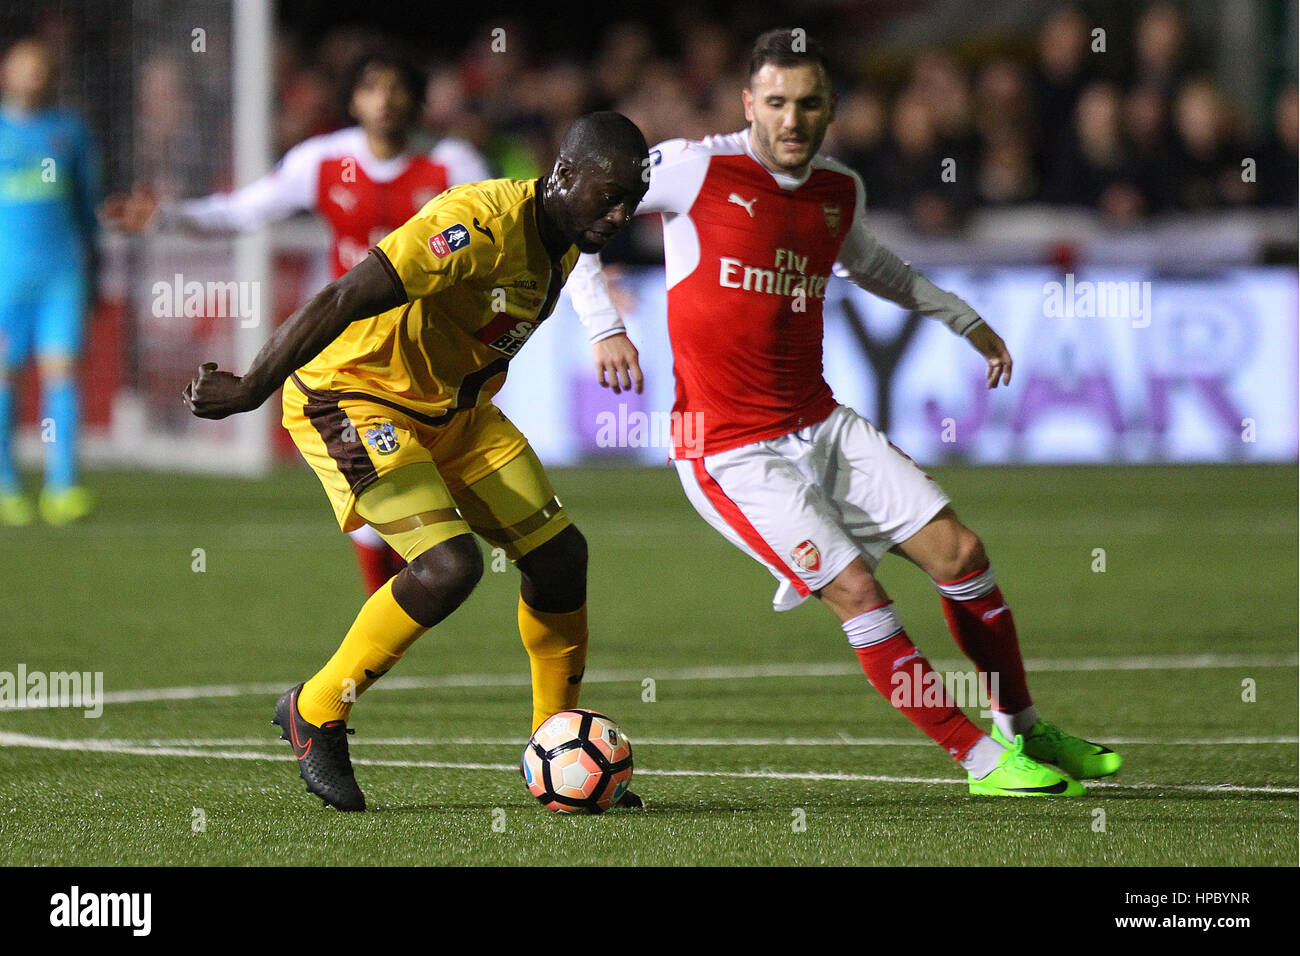 Sutton, UK. 20th Feb, 2017. Roarie Deacon of Sutton United and Lucas of Arsenal in action during the FA Cup Fifth Round match between Sutton United and Arsenal at Borough Sports Ground on February 20th 2017 in Sutton, England. Credit: Daniel Chesterton/Alamy Live News Stock Photo